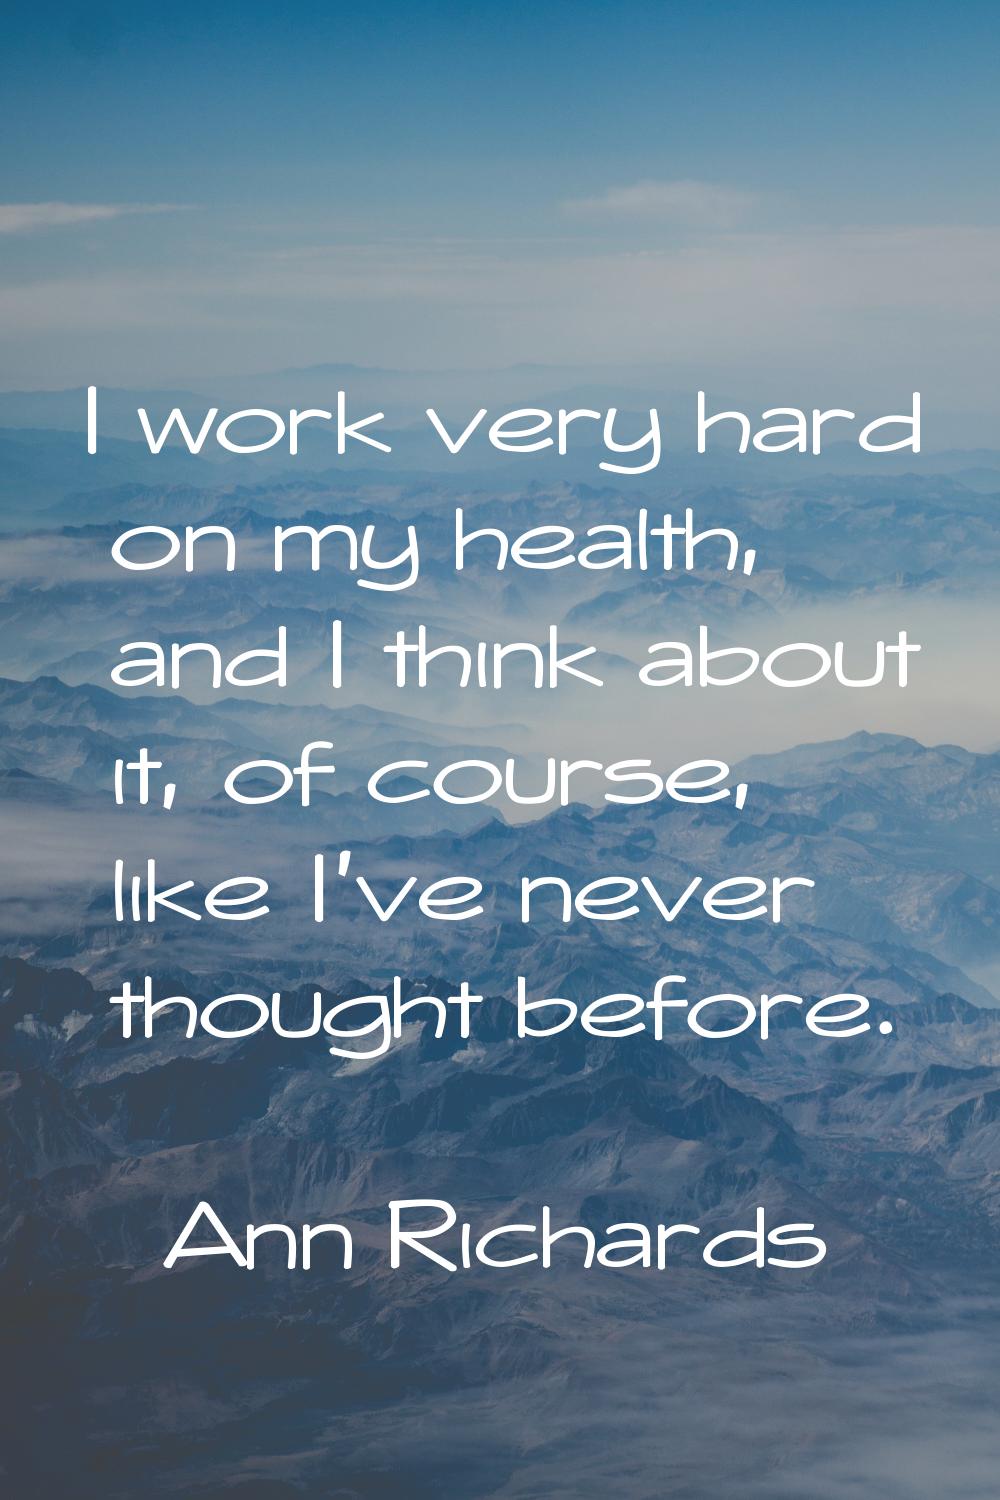 I work very hard on my health, and I think about it, of course, like I've never thought before.